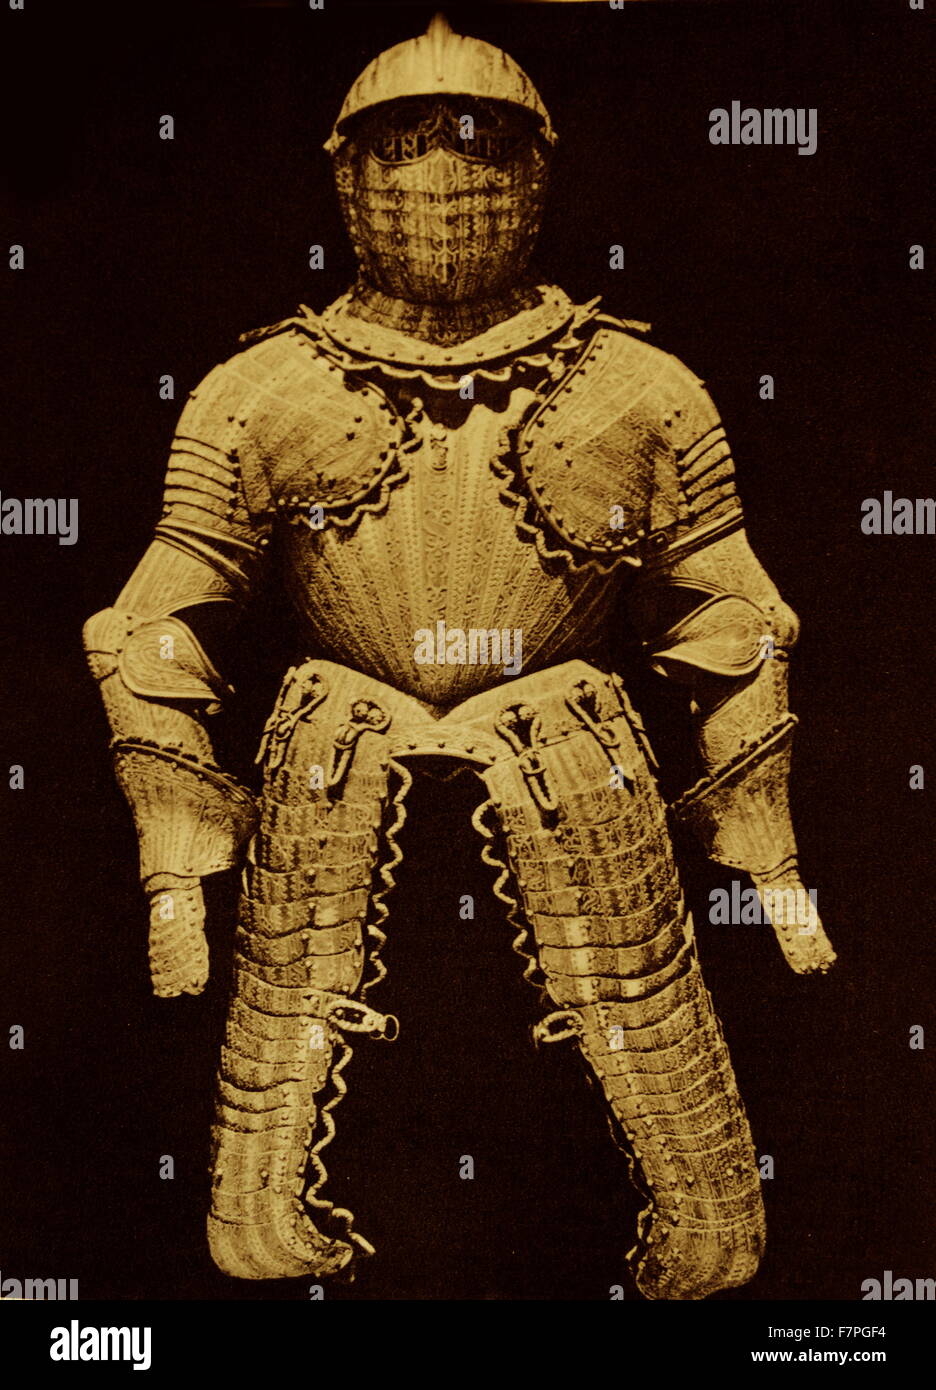 armour of King Philip II of Spain circa 1575. it is preserved in the Royal Armoury of Madrid, it was made in Navarre in the sixteenth century Stock Photo